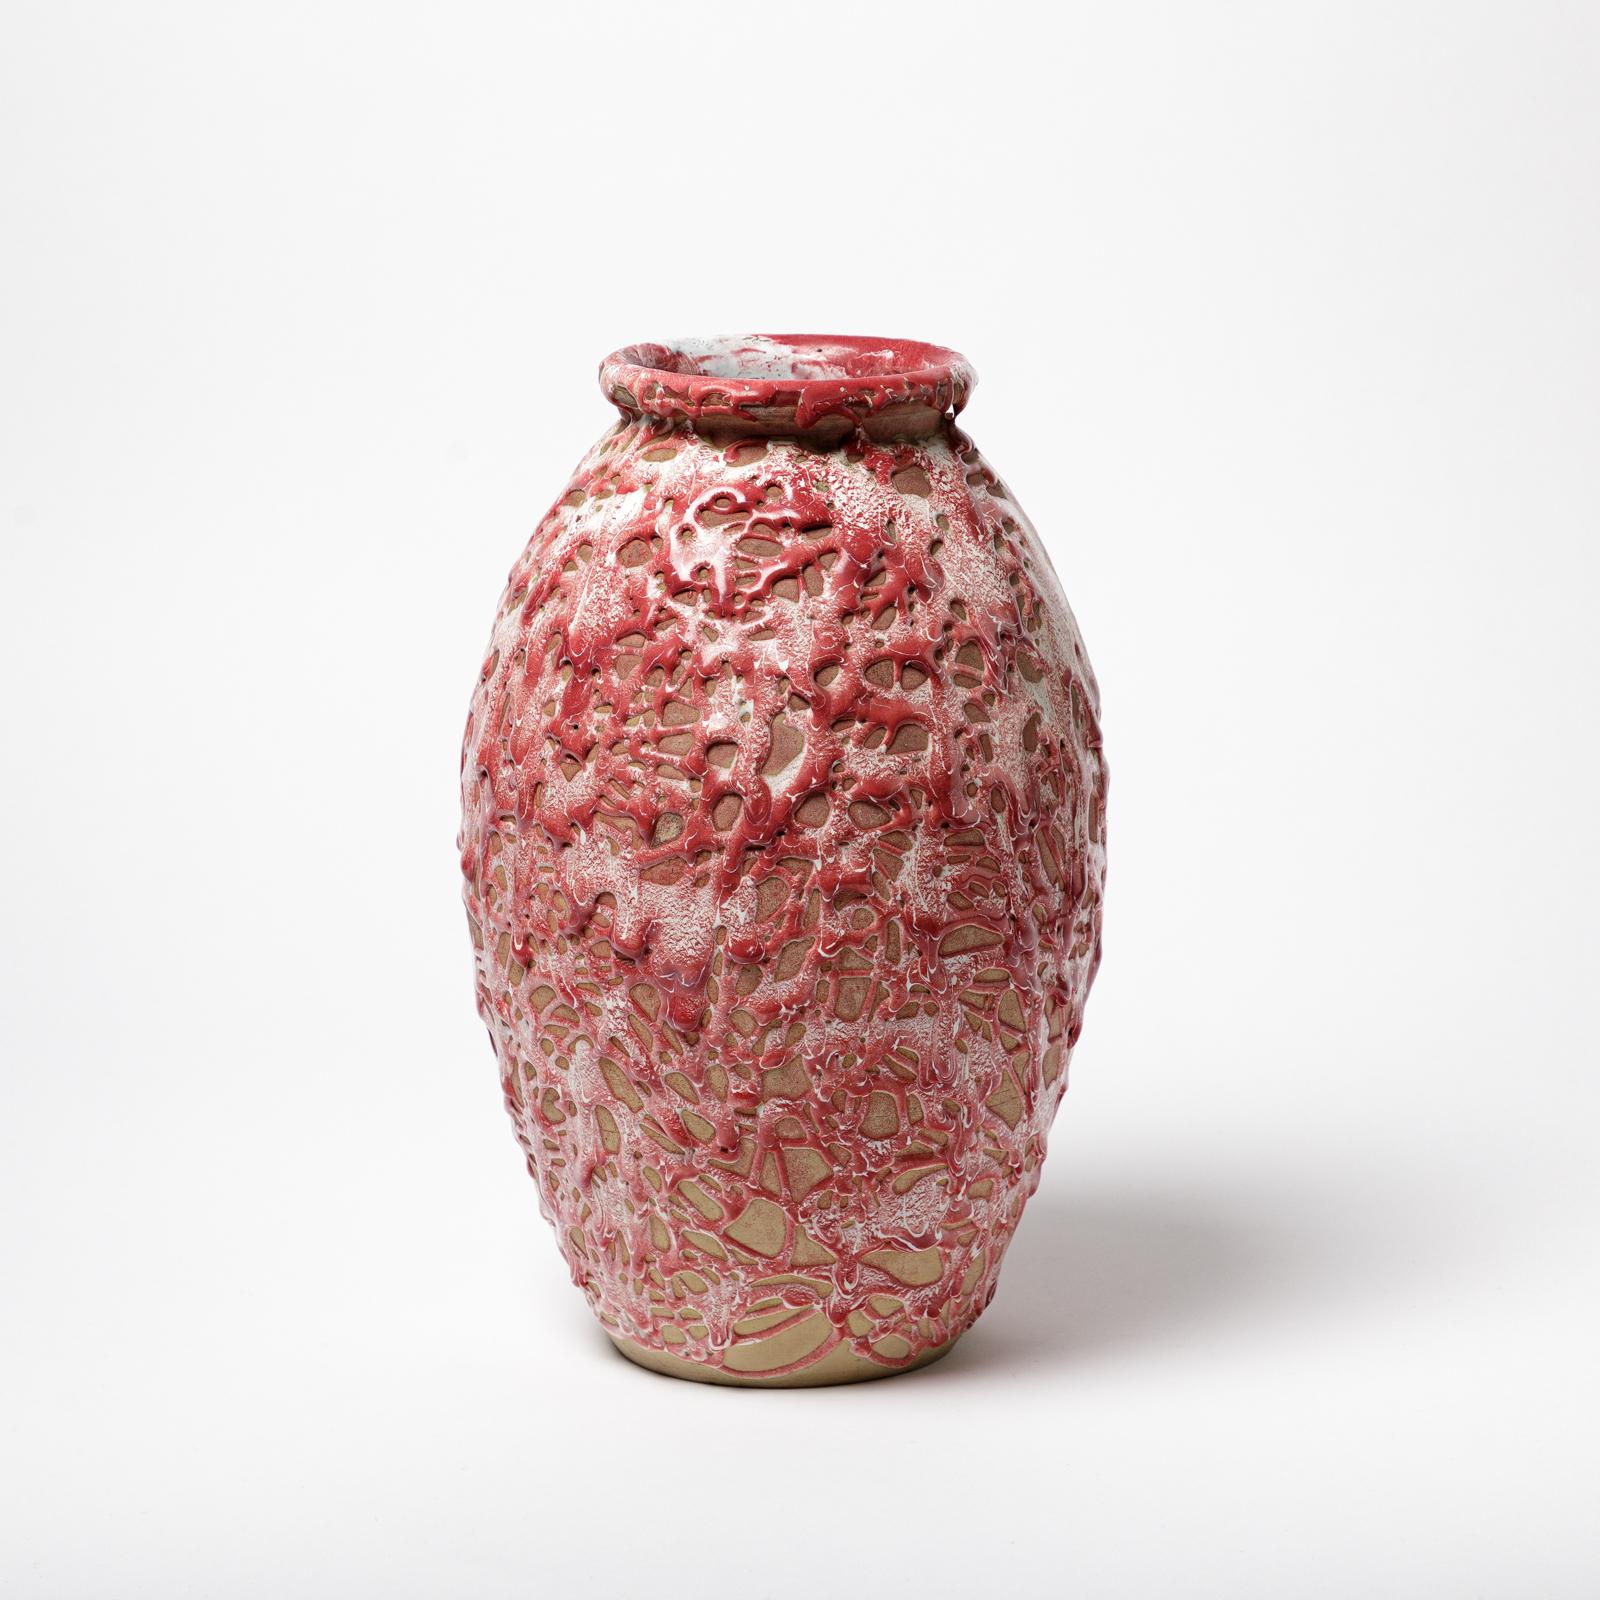 A ceramic vase with pink and white glaze decoration attributed to 